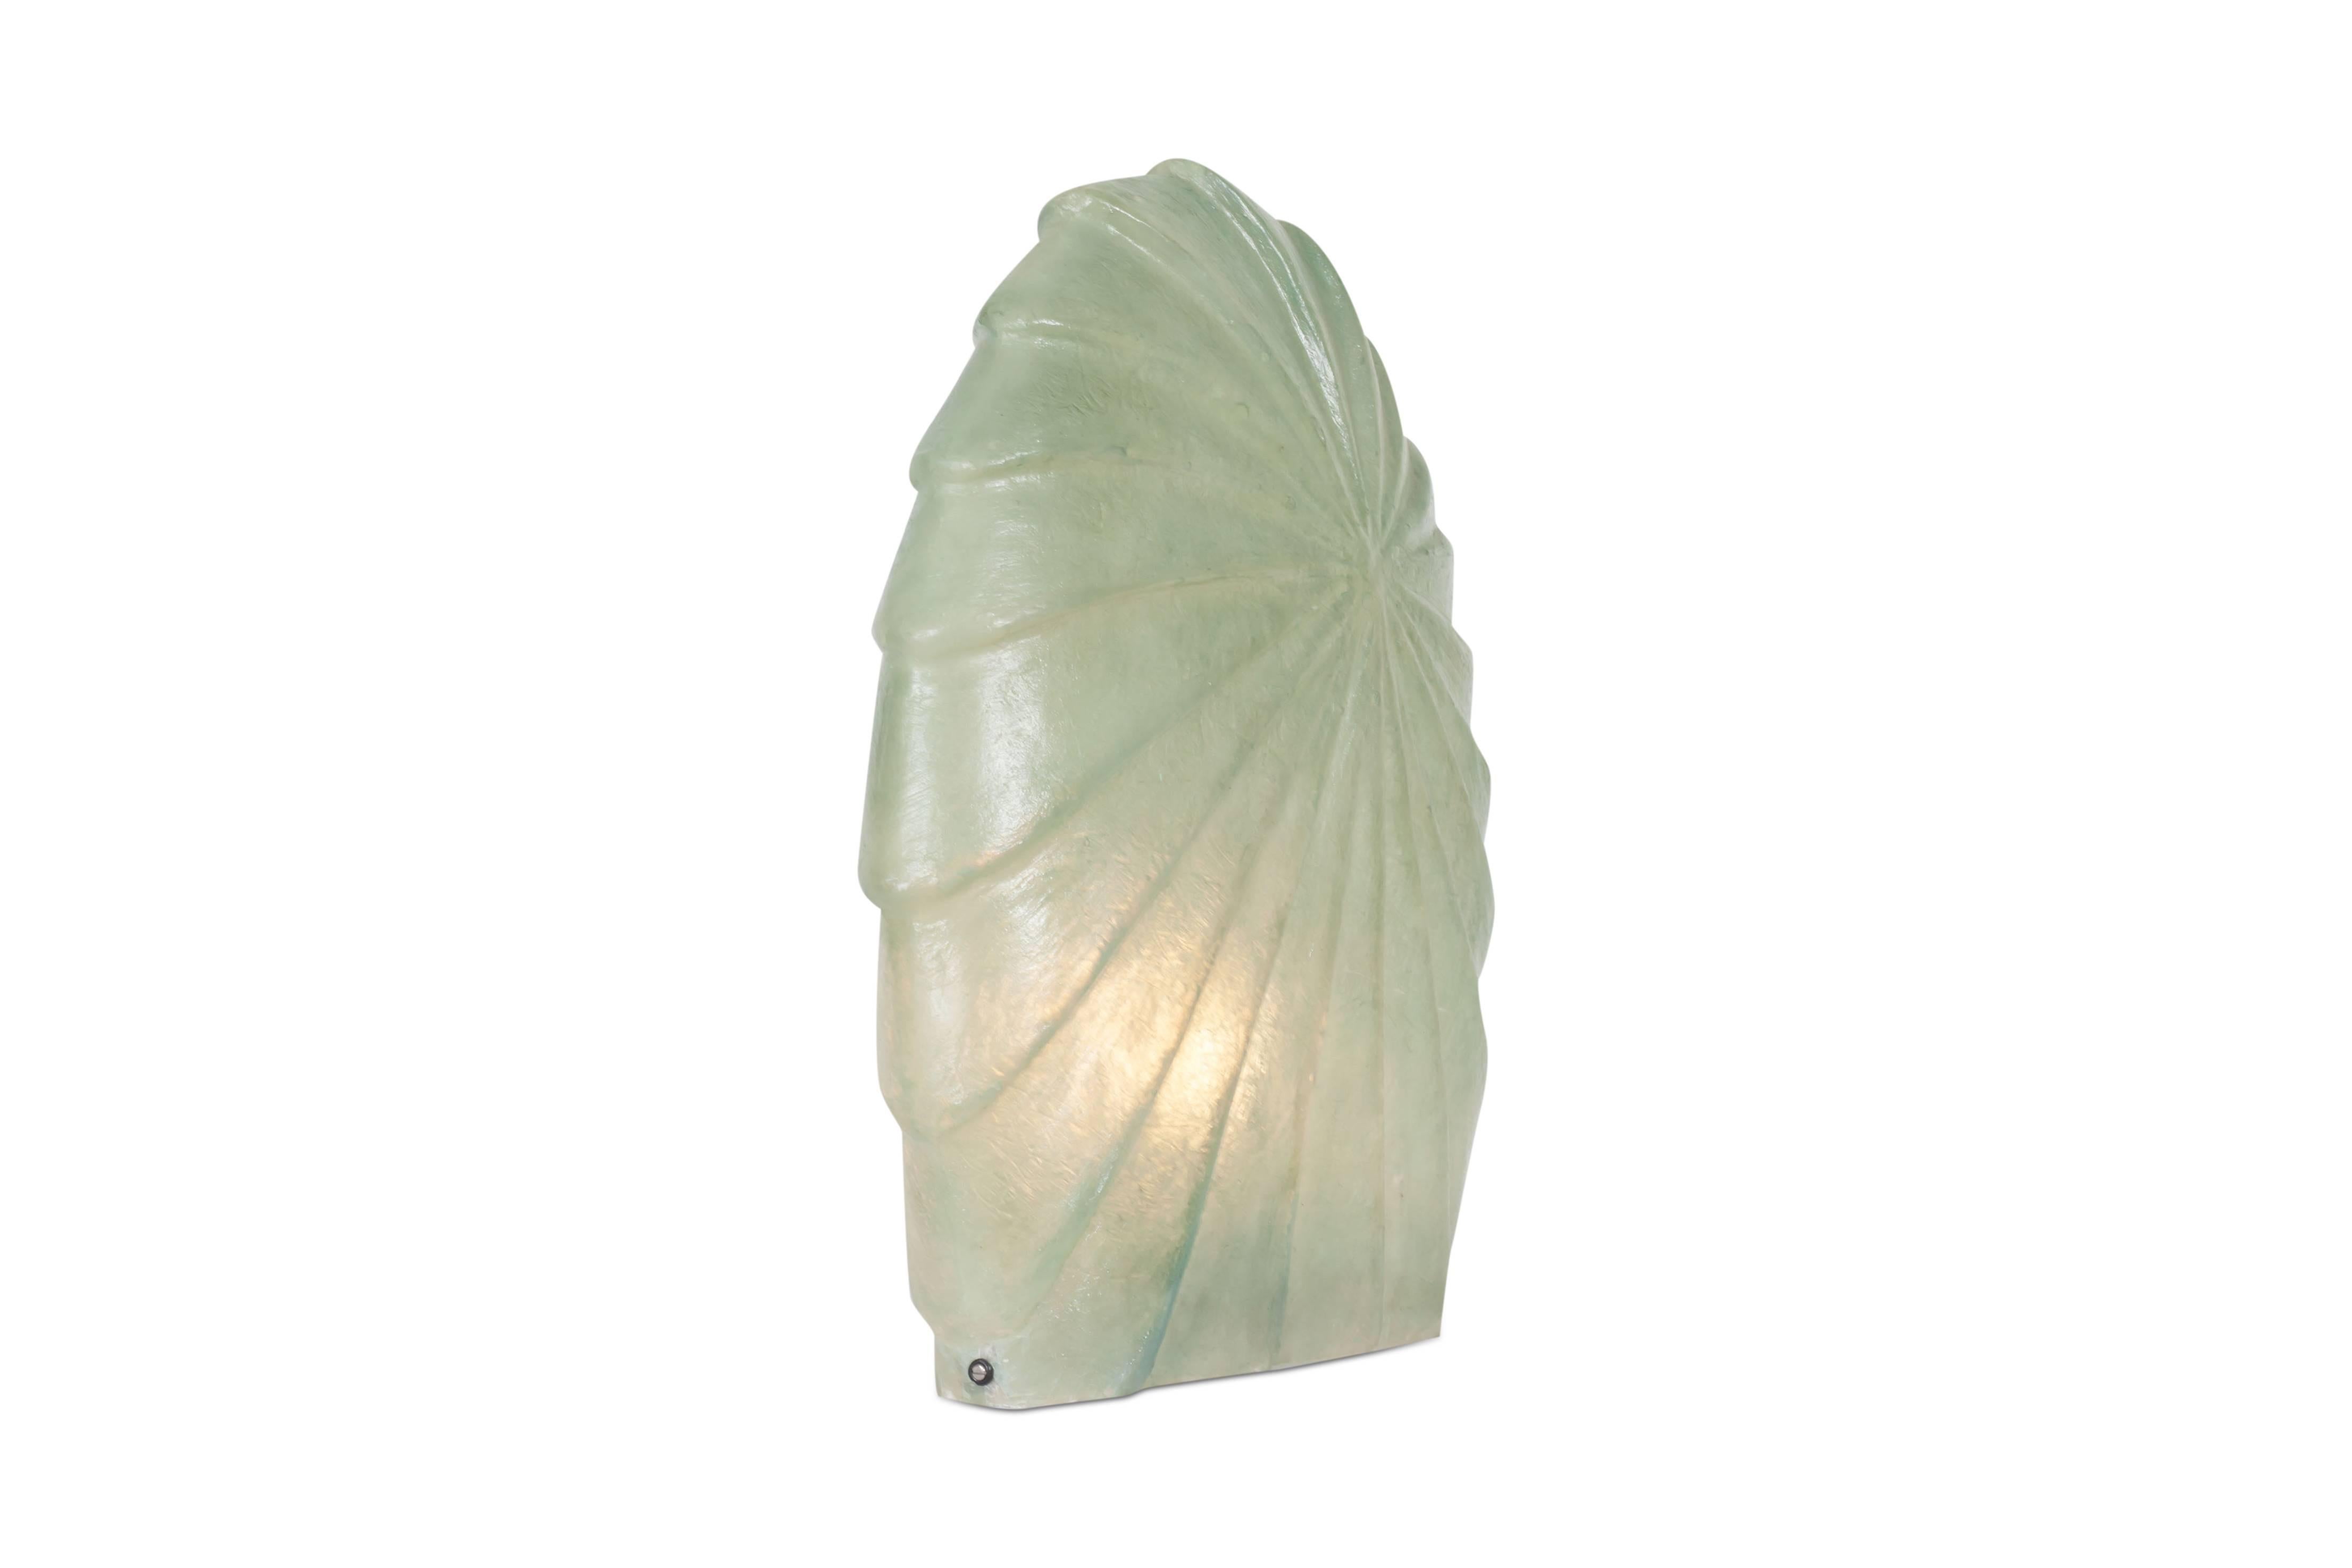 Art Deco style table lamp in green fiberglass.
The lamp is shaped like a fossil and very decorative.